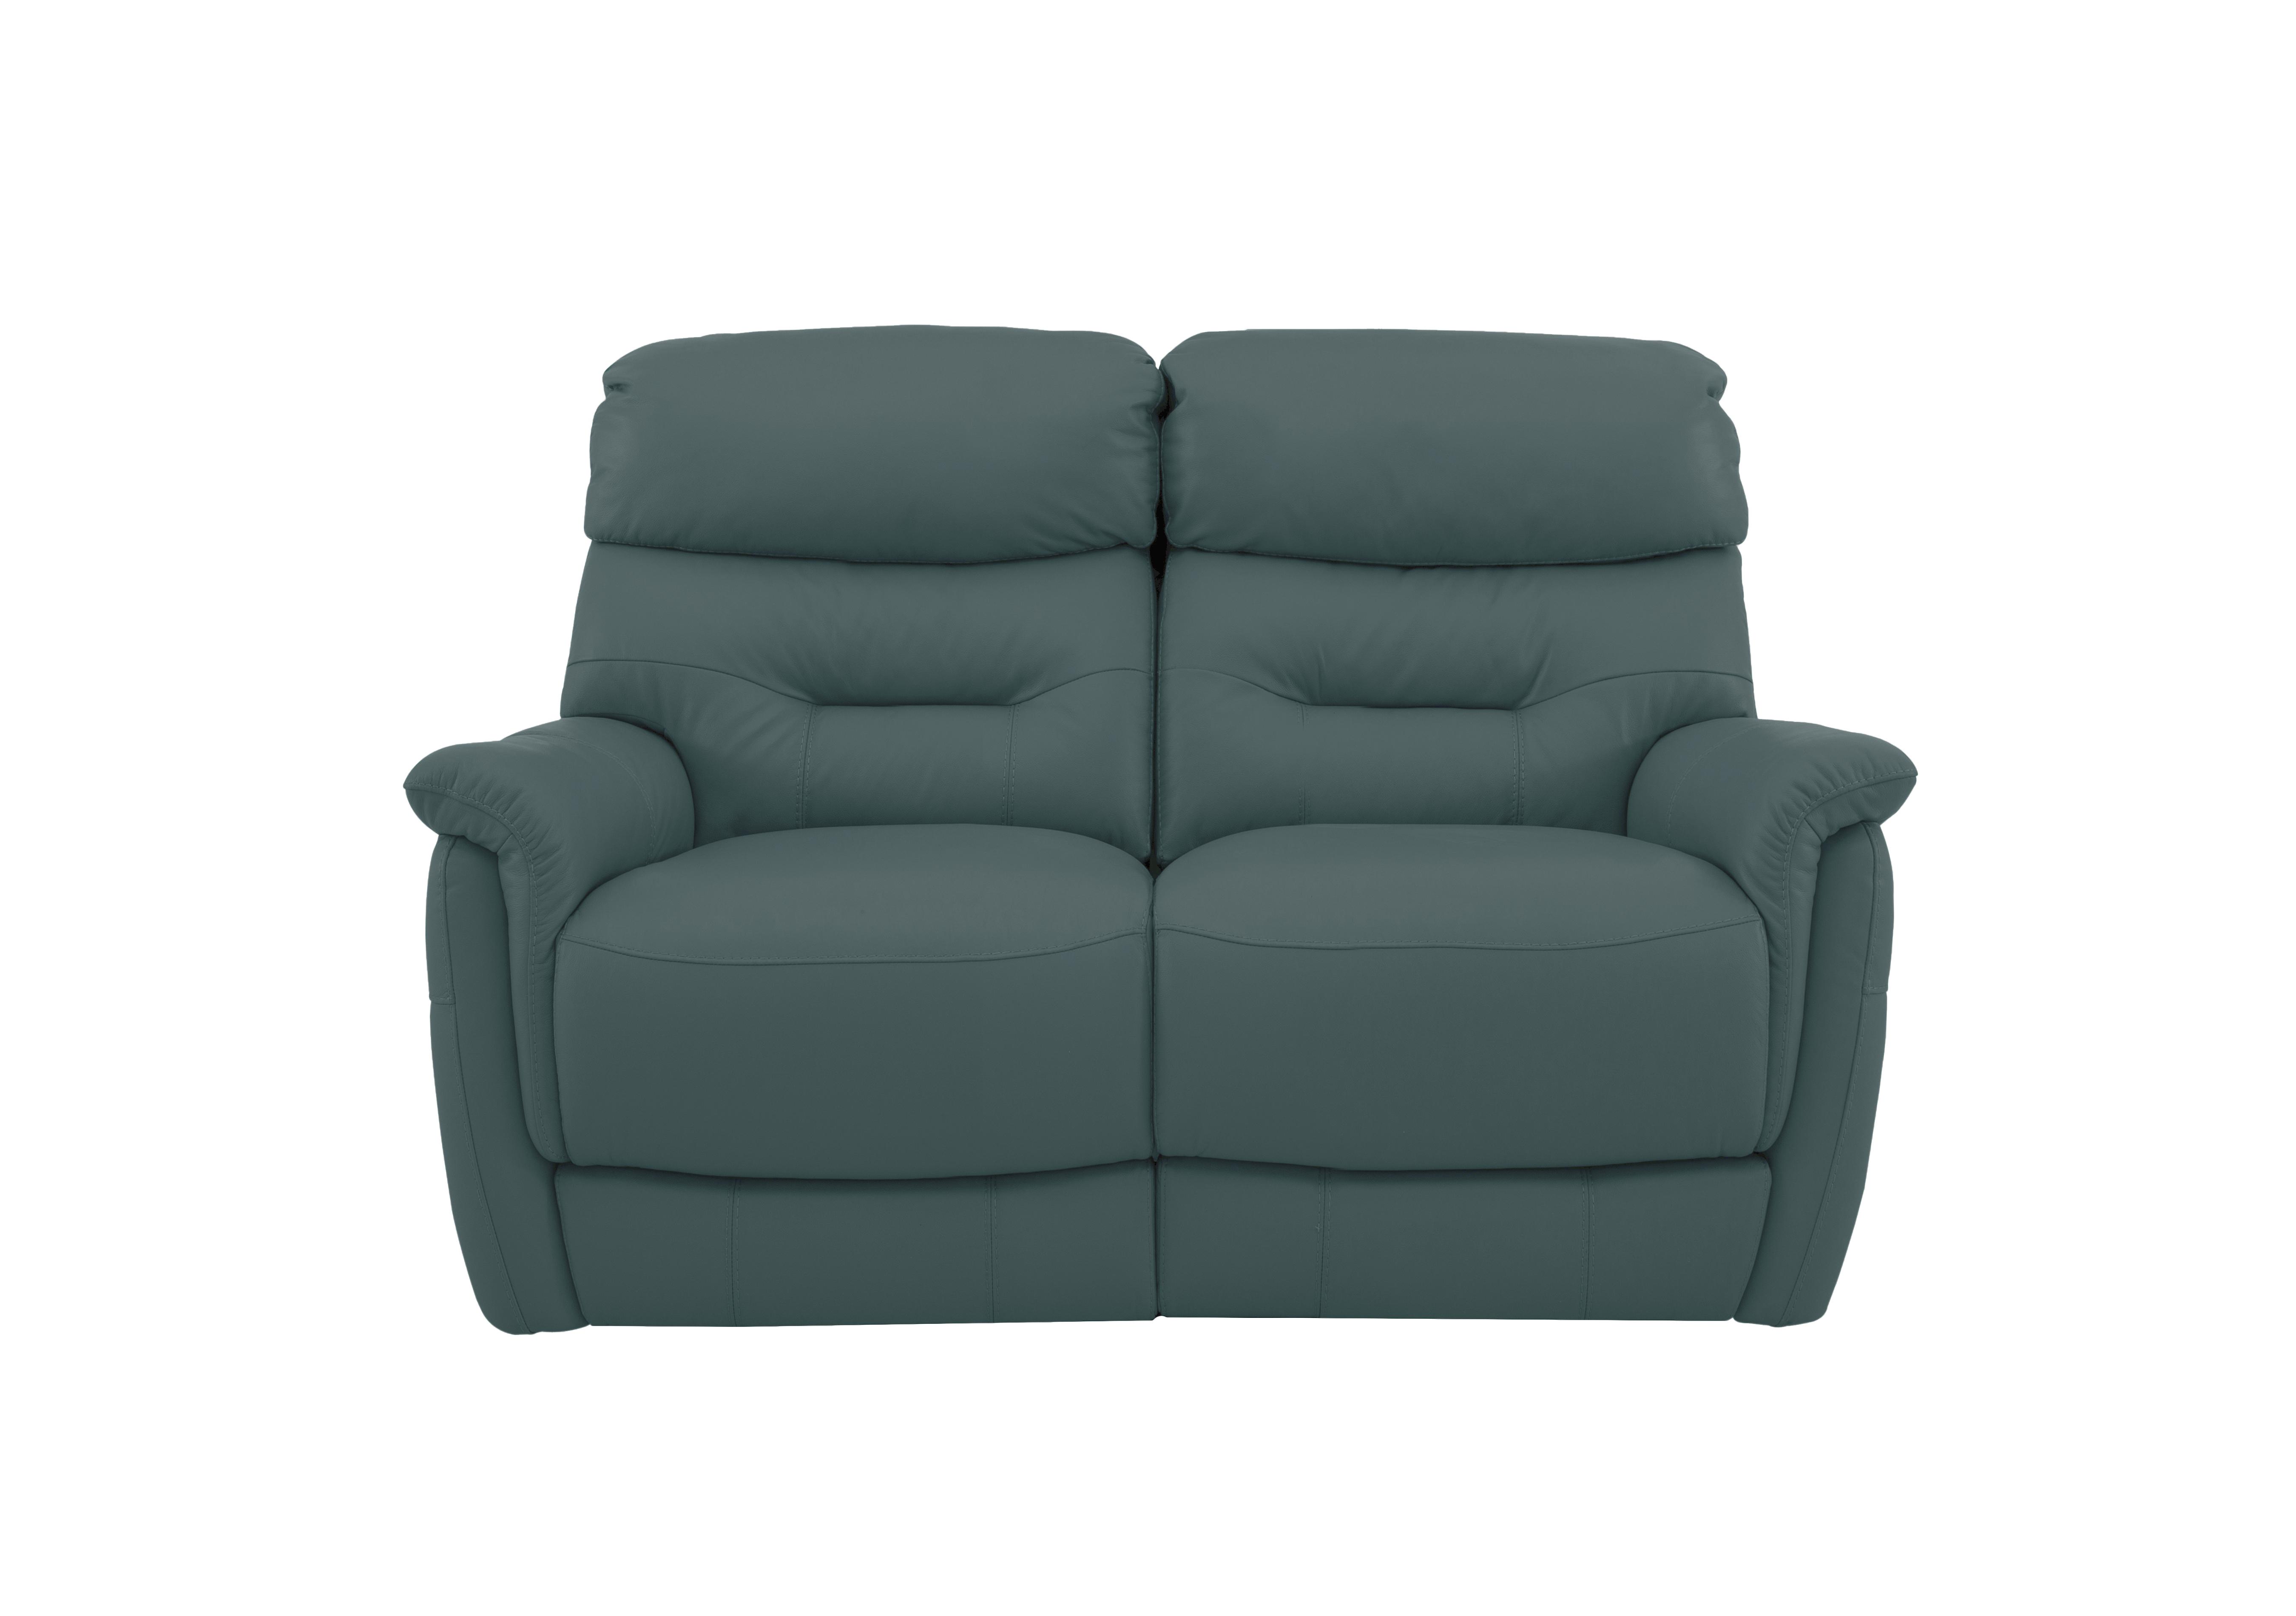 Chicago 2 Seater Leather Sofa in Bv-301e Lake Green on Furniture Village